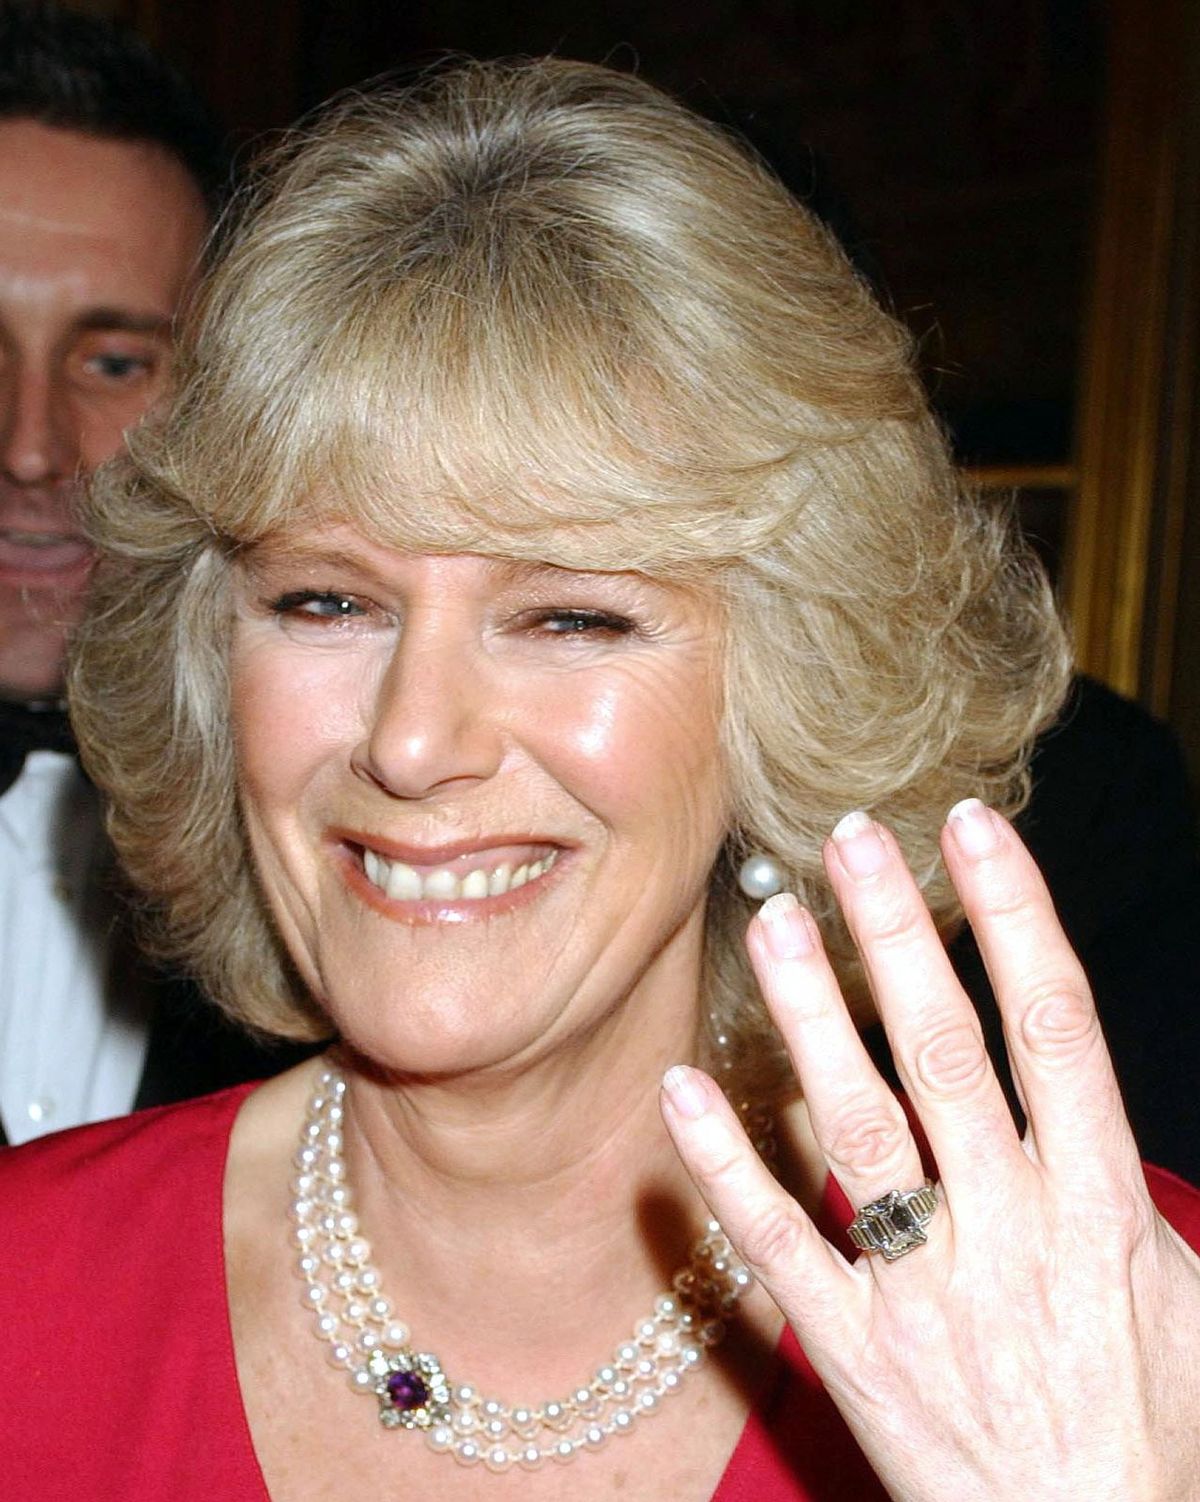 prince charles and camilla parker bowles announce their engagement   februaury 10, 2005